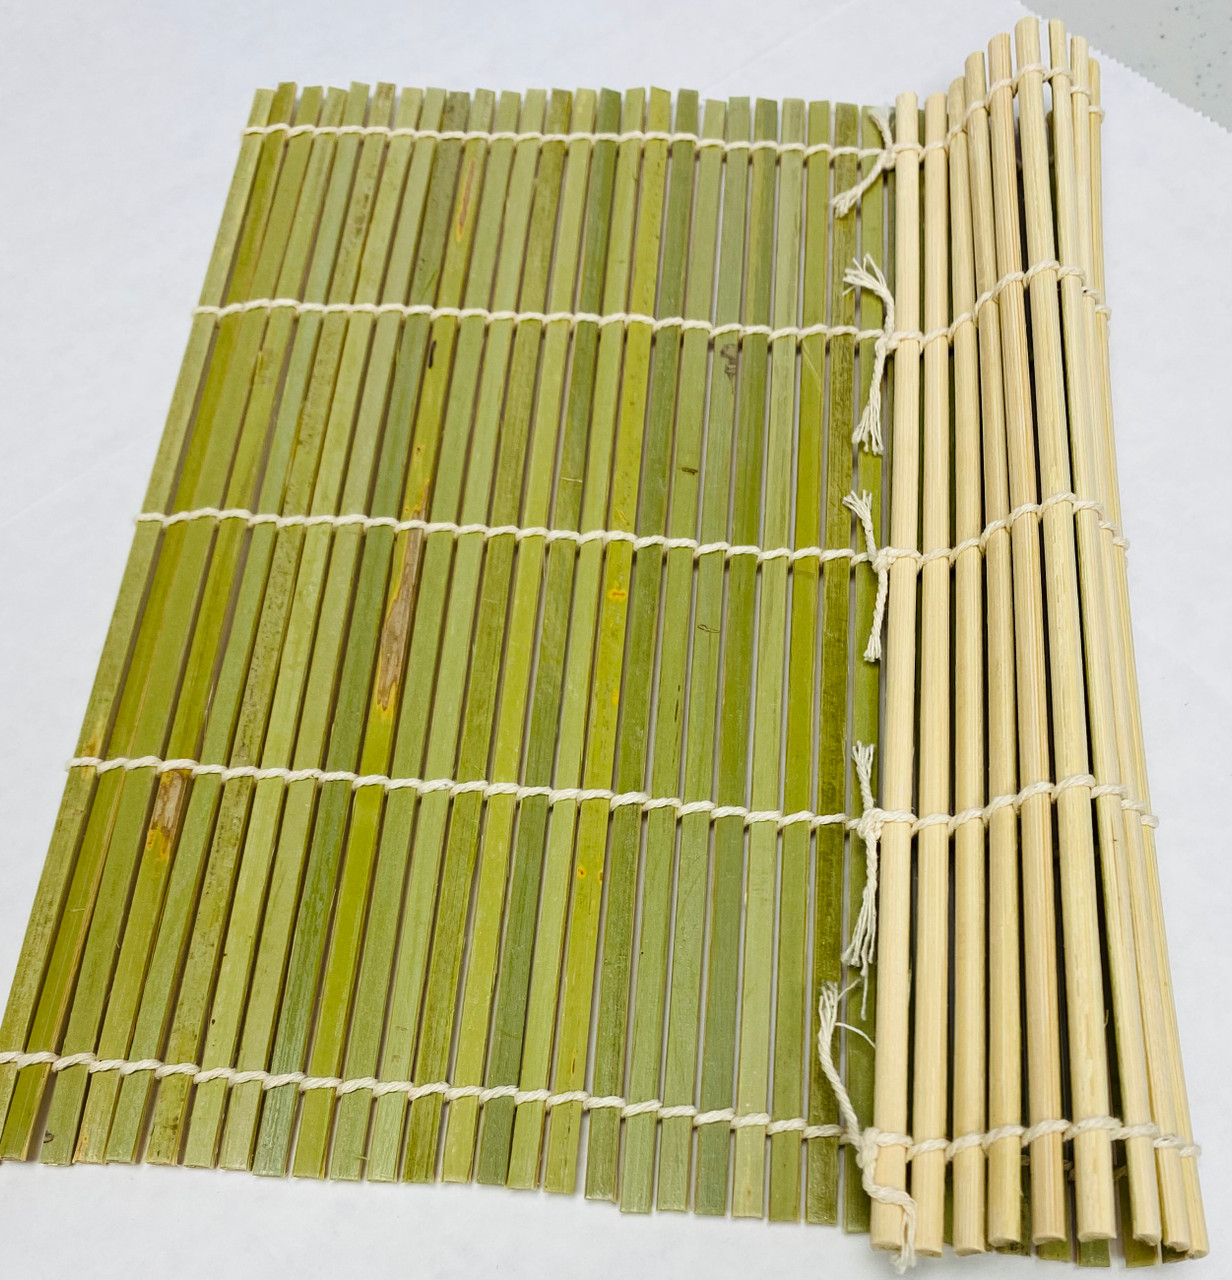 Bamboo Reed Cheese Mat - Standing Stone Farms